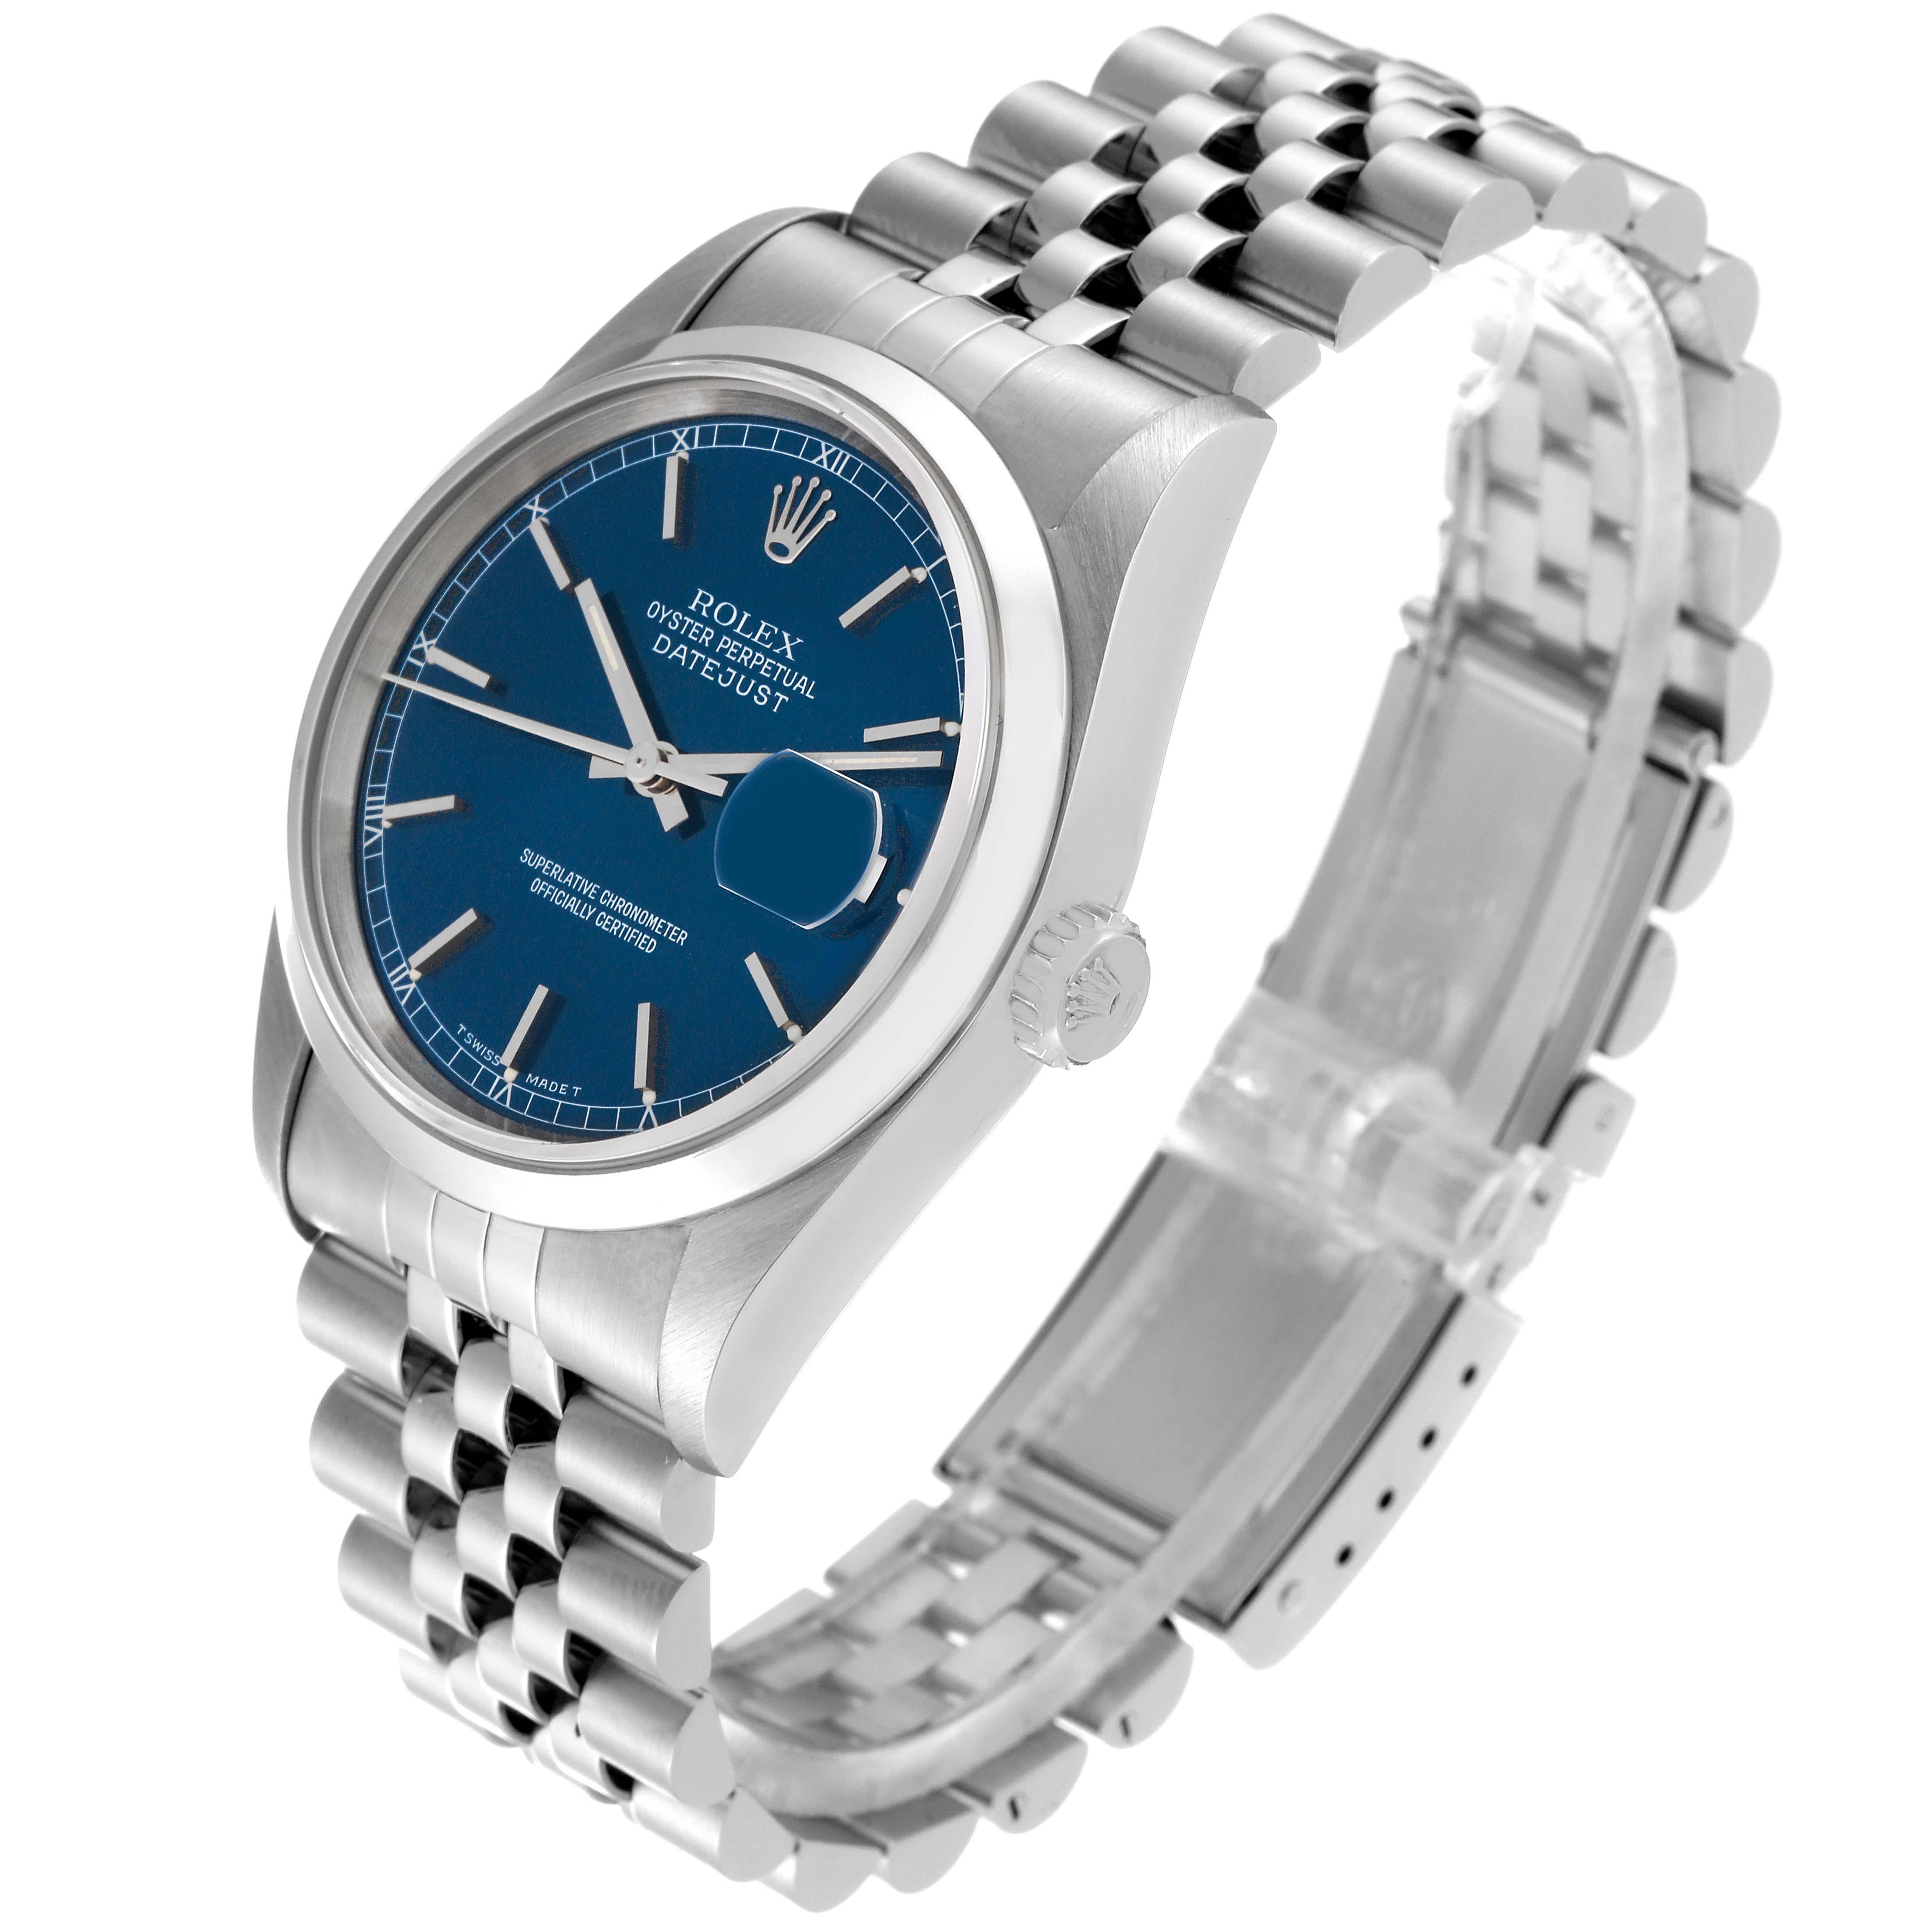  Rolex Datejust 36mm Blue Dial Smooth Bezel Steel Mens Watch 16200 Box Papers Pour hommes 